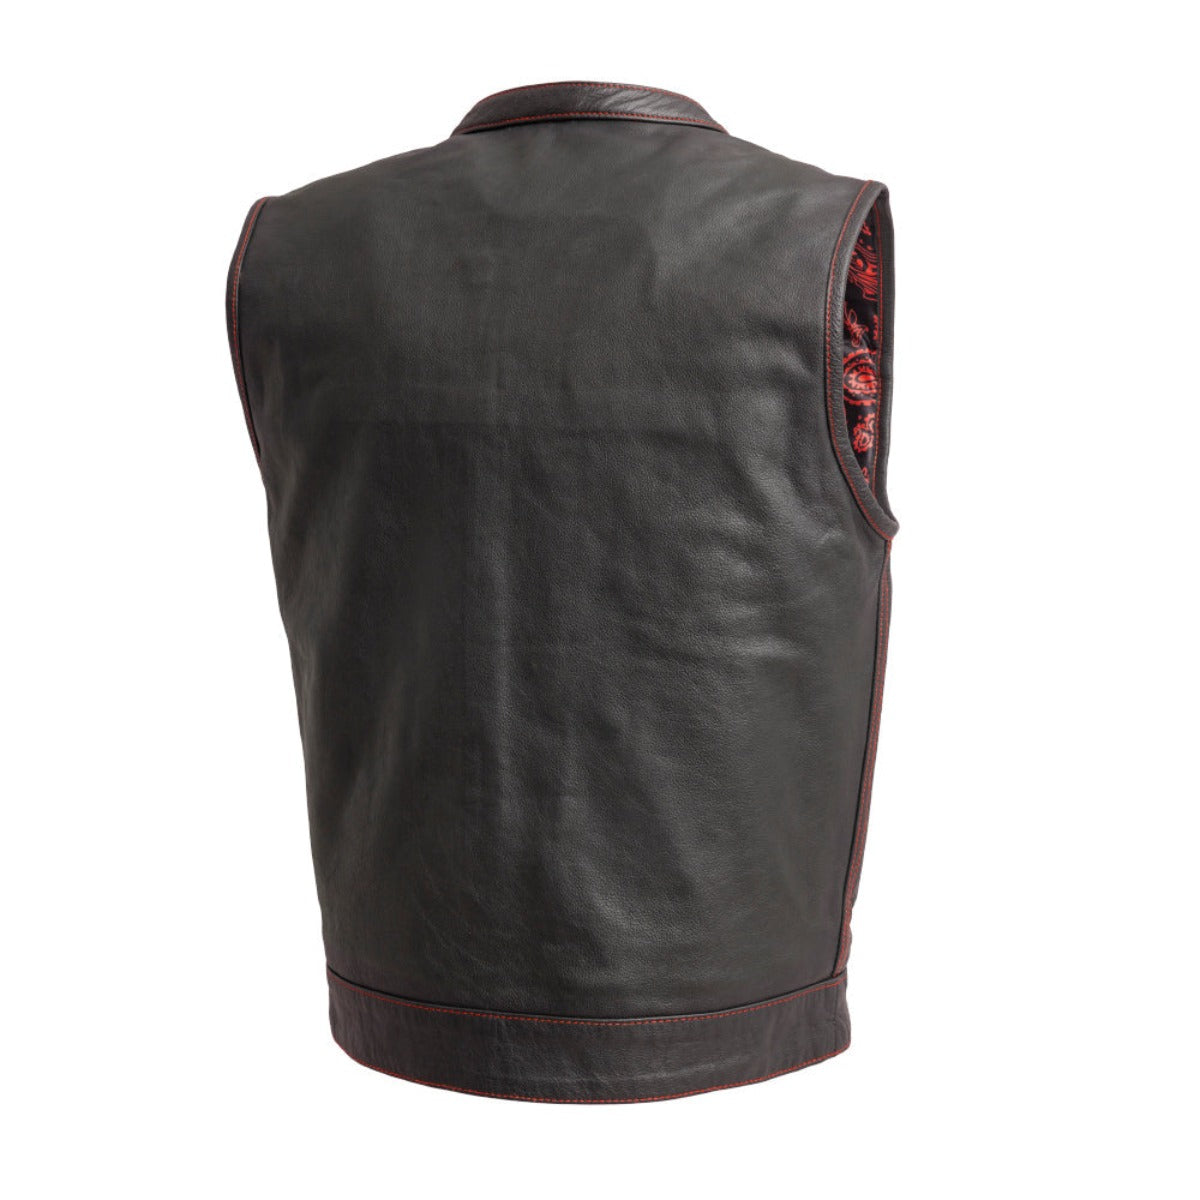 First Manufacturing Men's The Cut Motorcycle Leather Vest, Black/Red